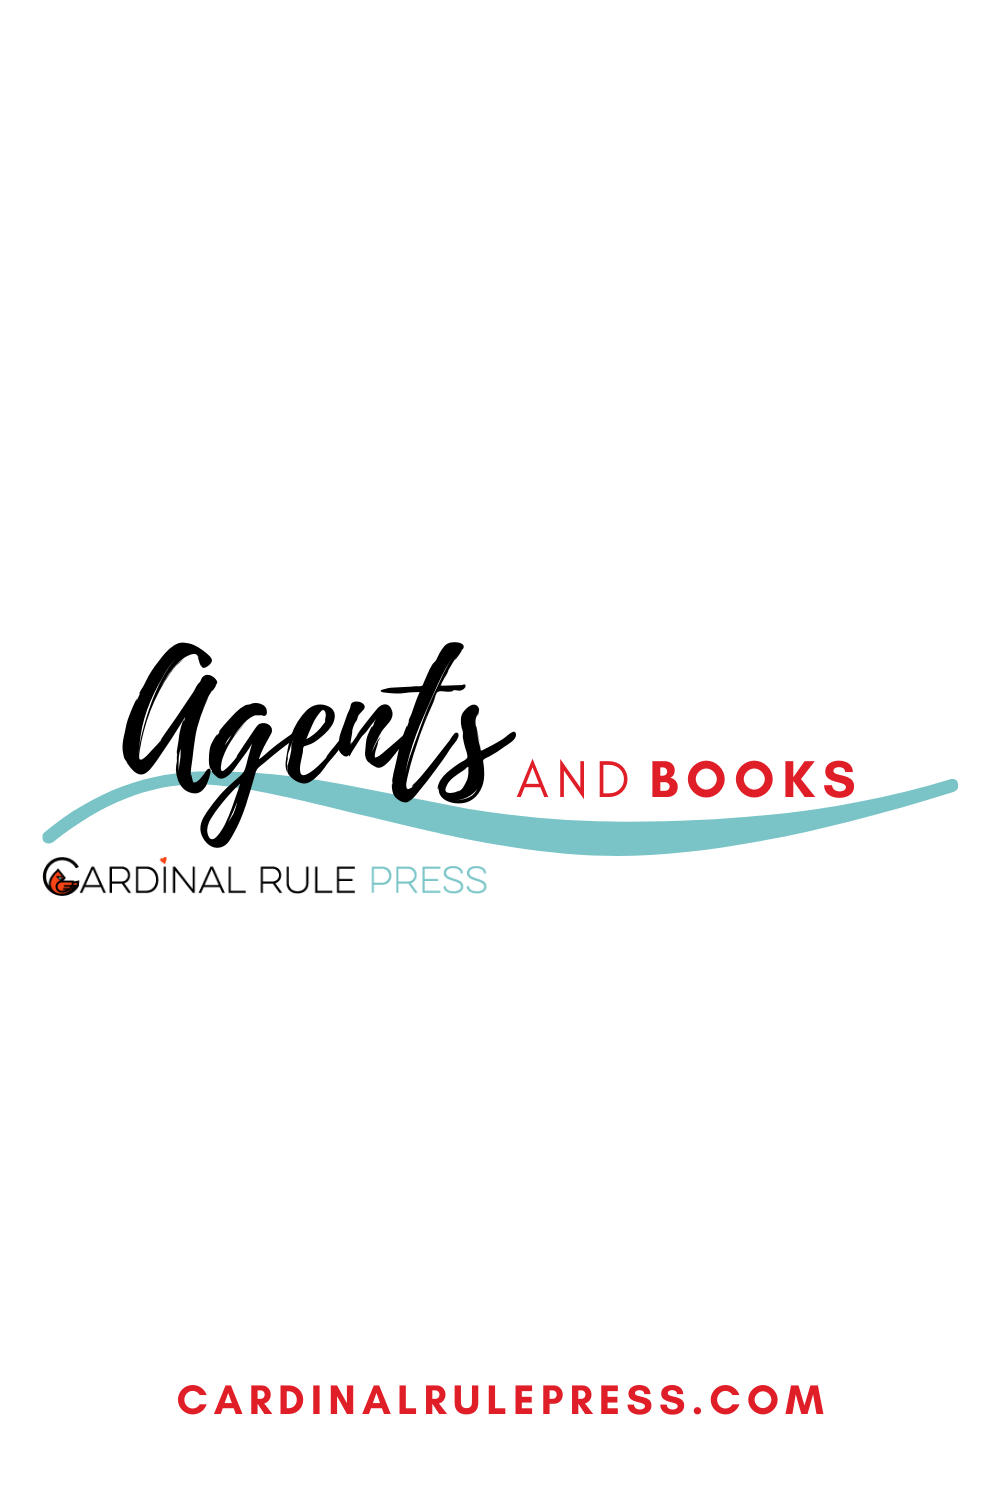 Literary agents share what they are looking for in a manuscript. They discuss their relationship with authors and offer advice to those who are looking to sign with an agent. #AllTheWRITEMarketing #Podcast #LiteraryAgents #CreativeMarketing